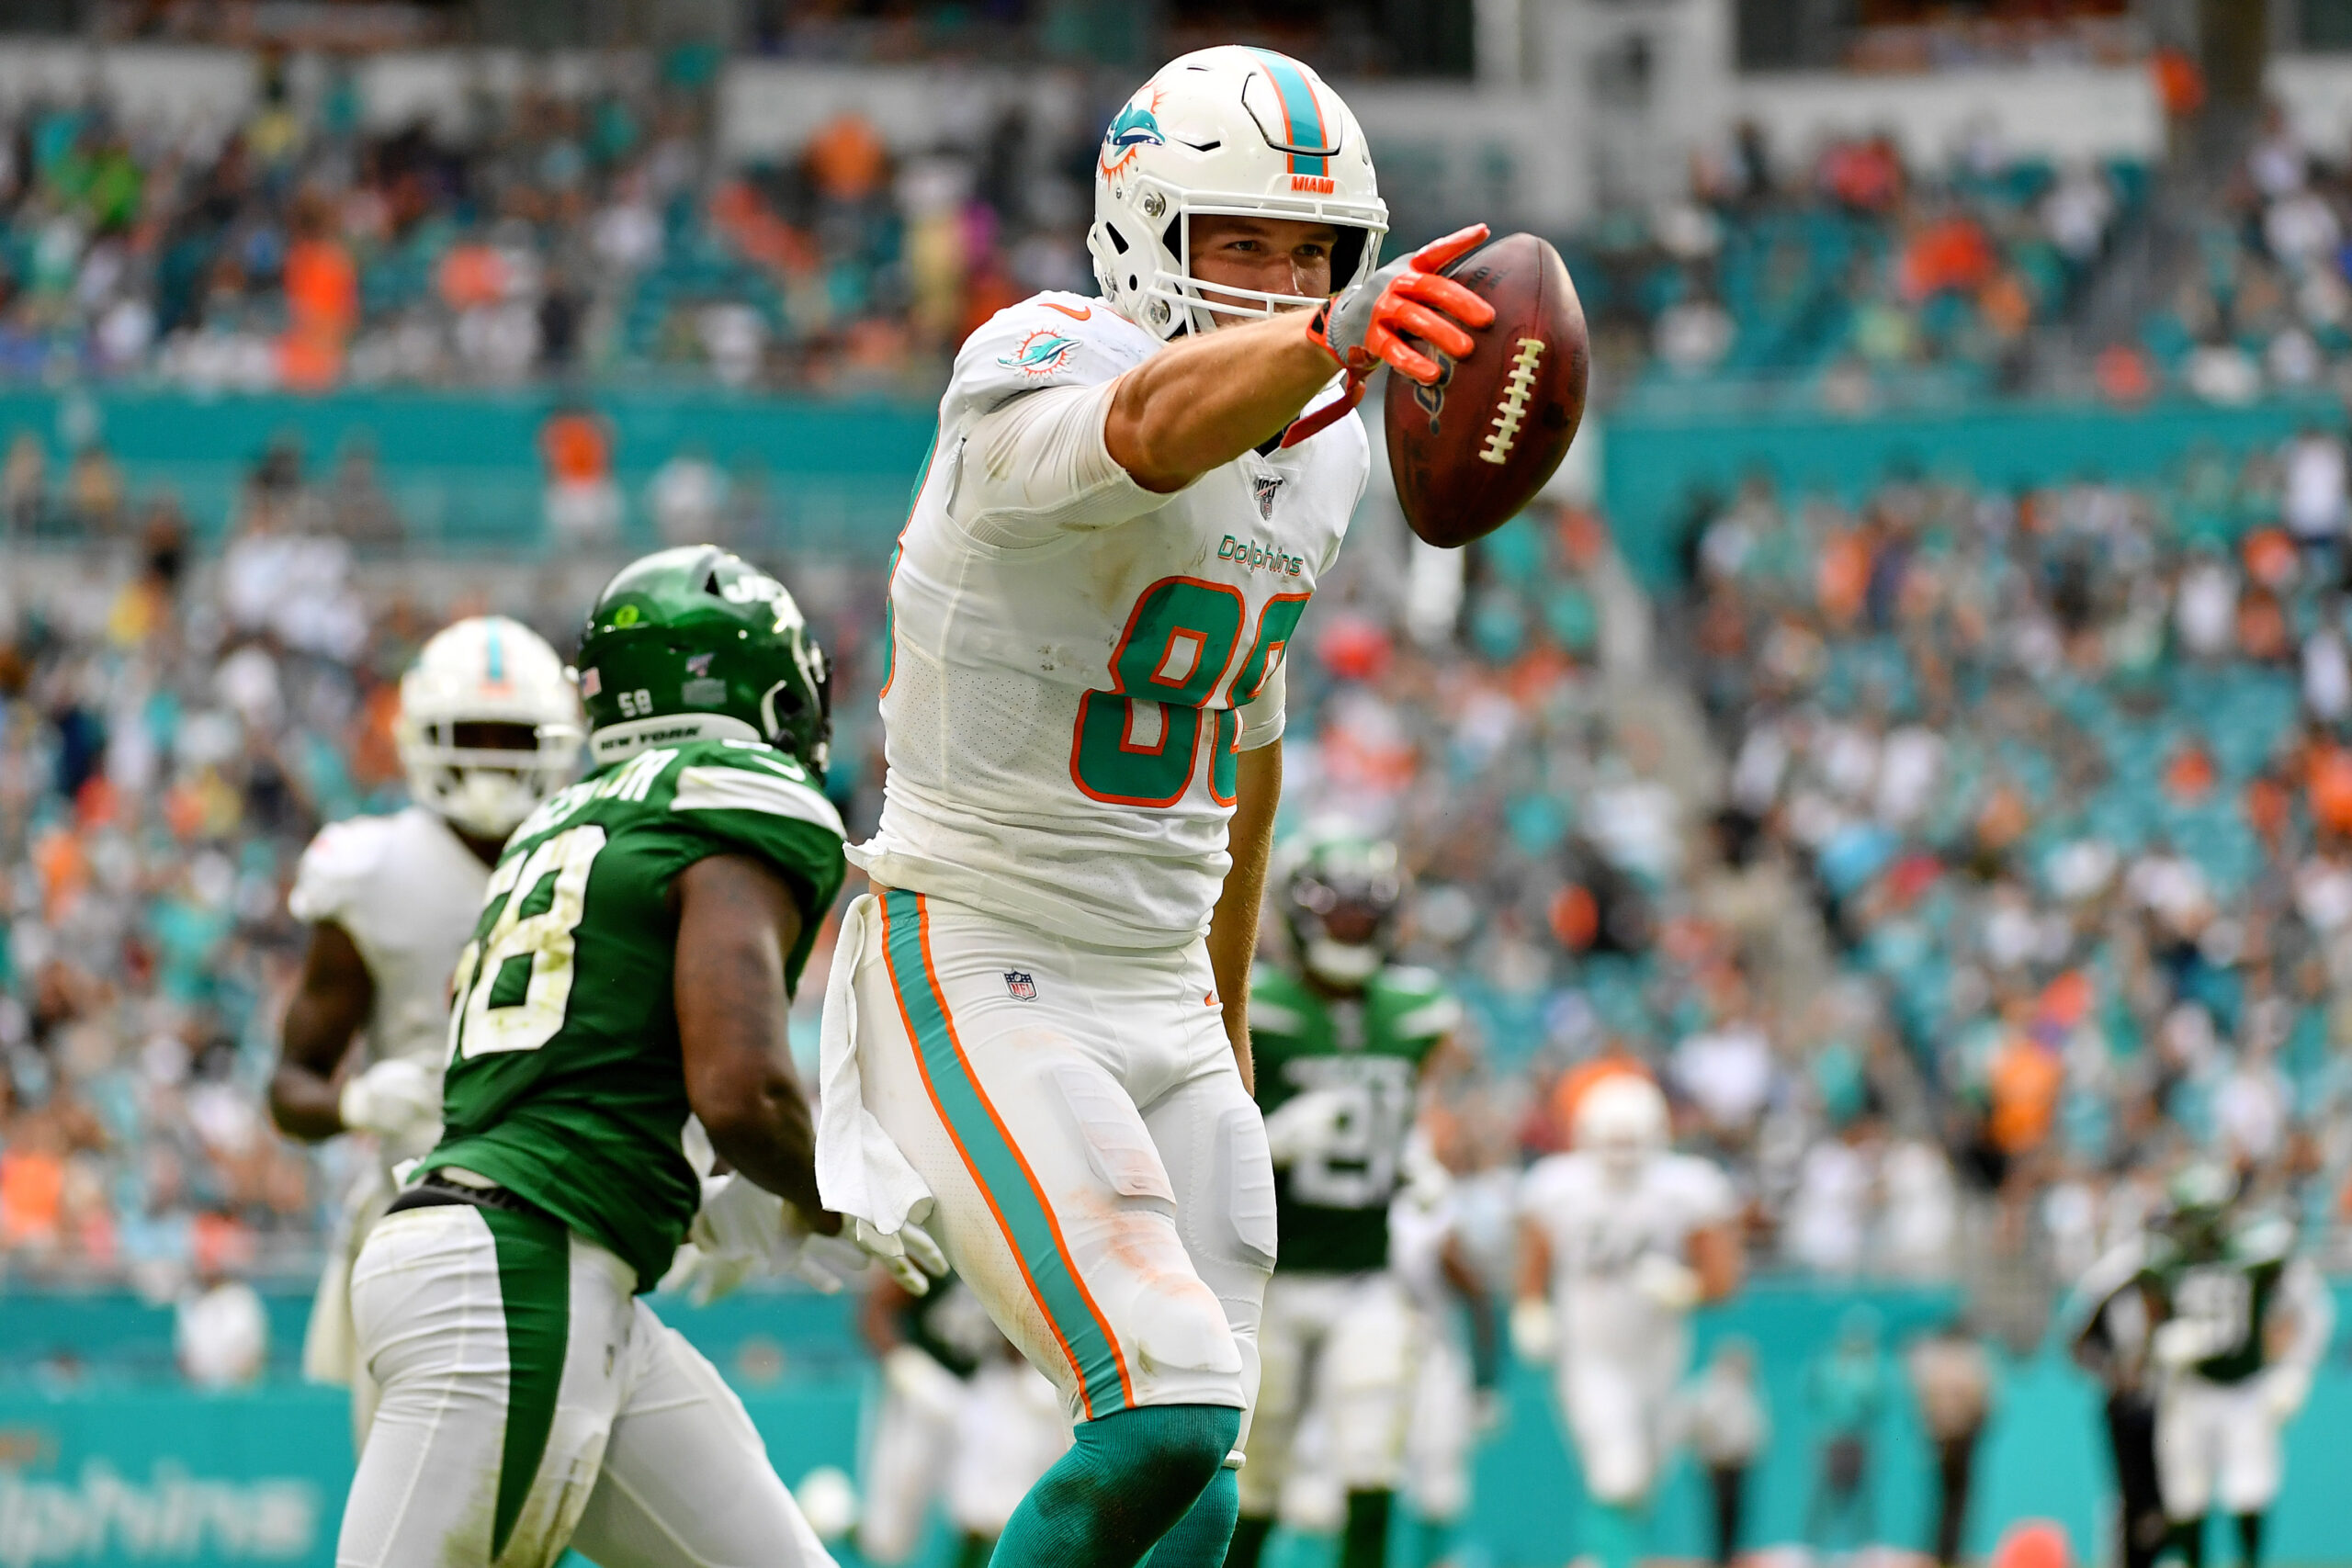 2022 franchise tag window open, who, if anyone, should the Dolphins use it on